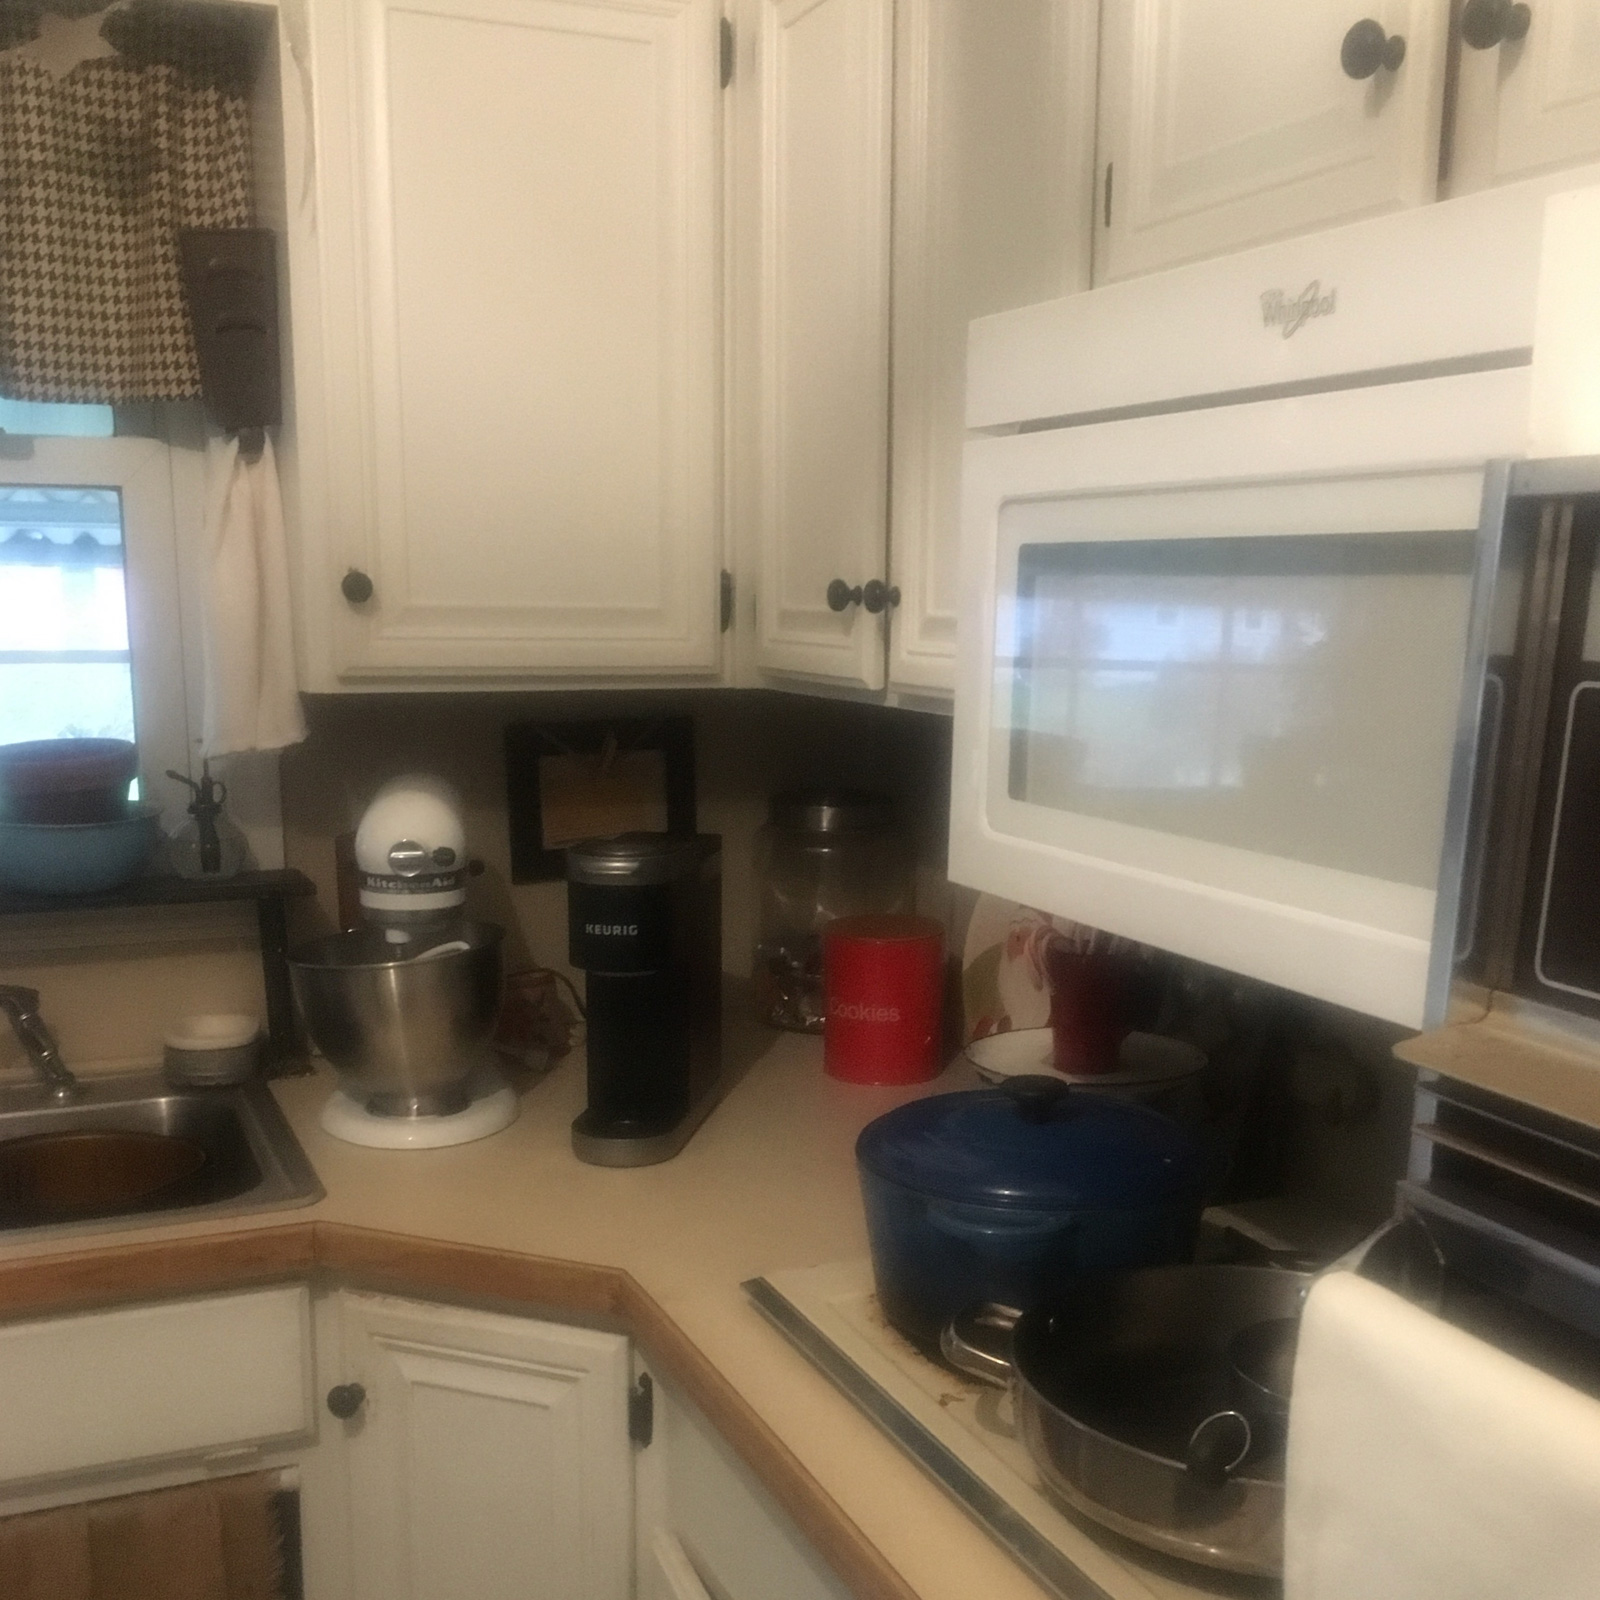 Entry 93 - Lackluster cabinets make this kitchen look old-school